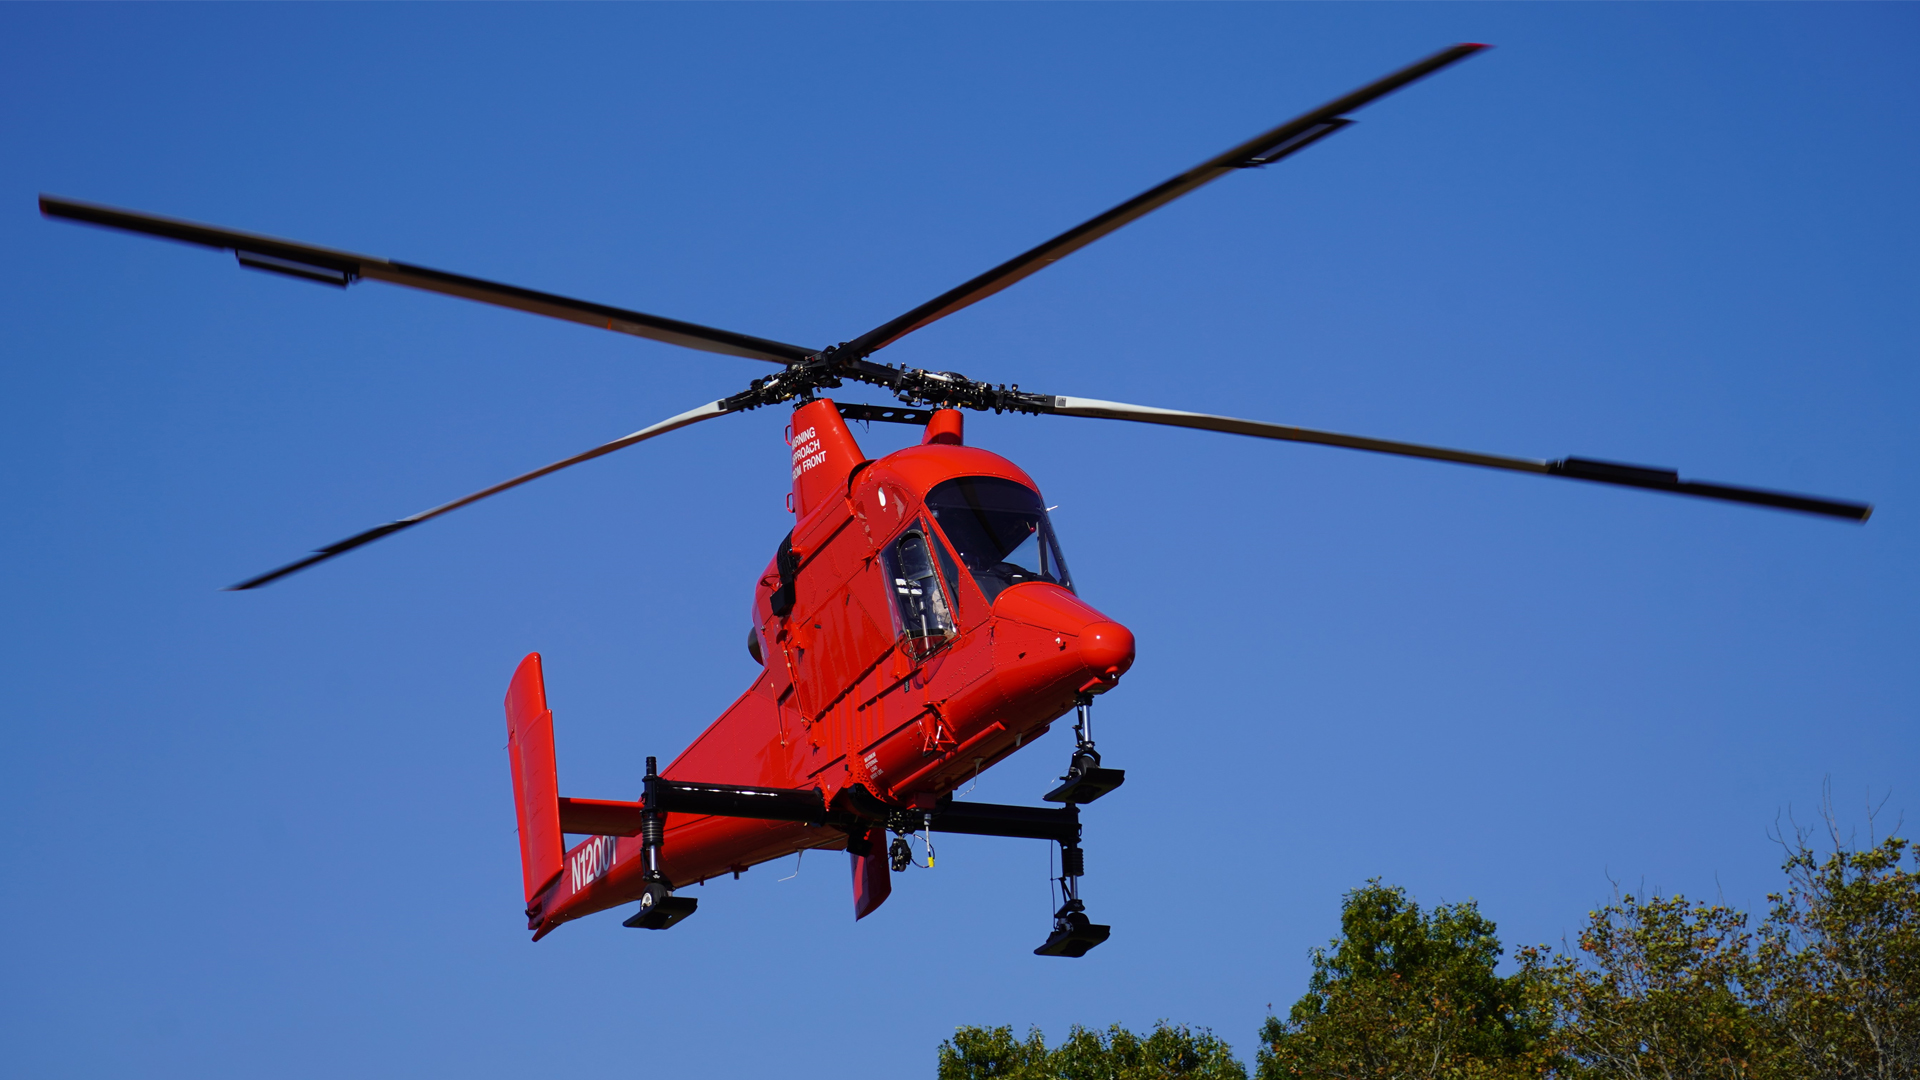 Kaman Receives Order for K-MAX Helicopter